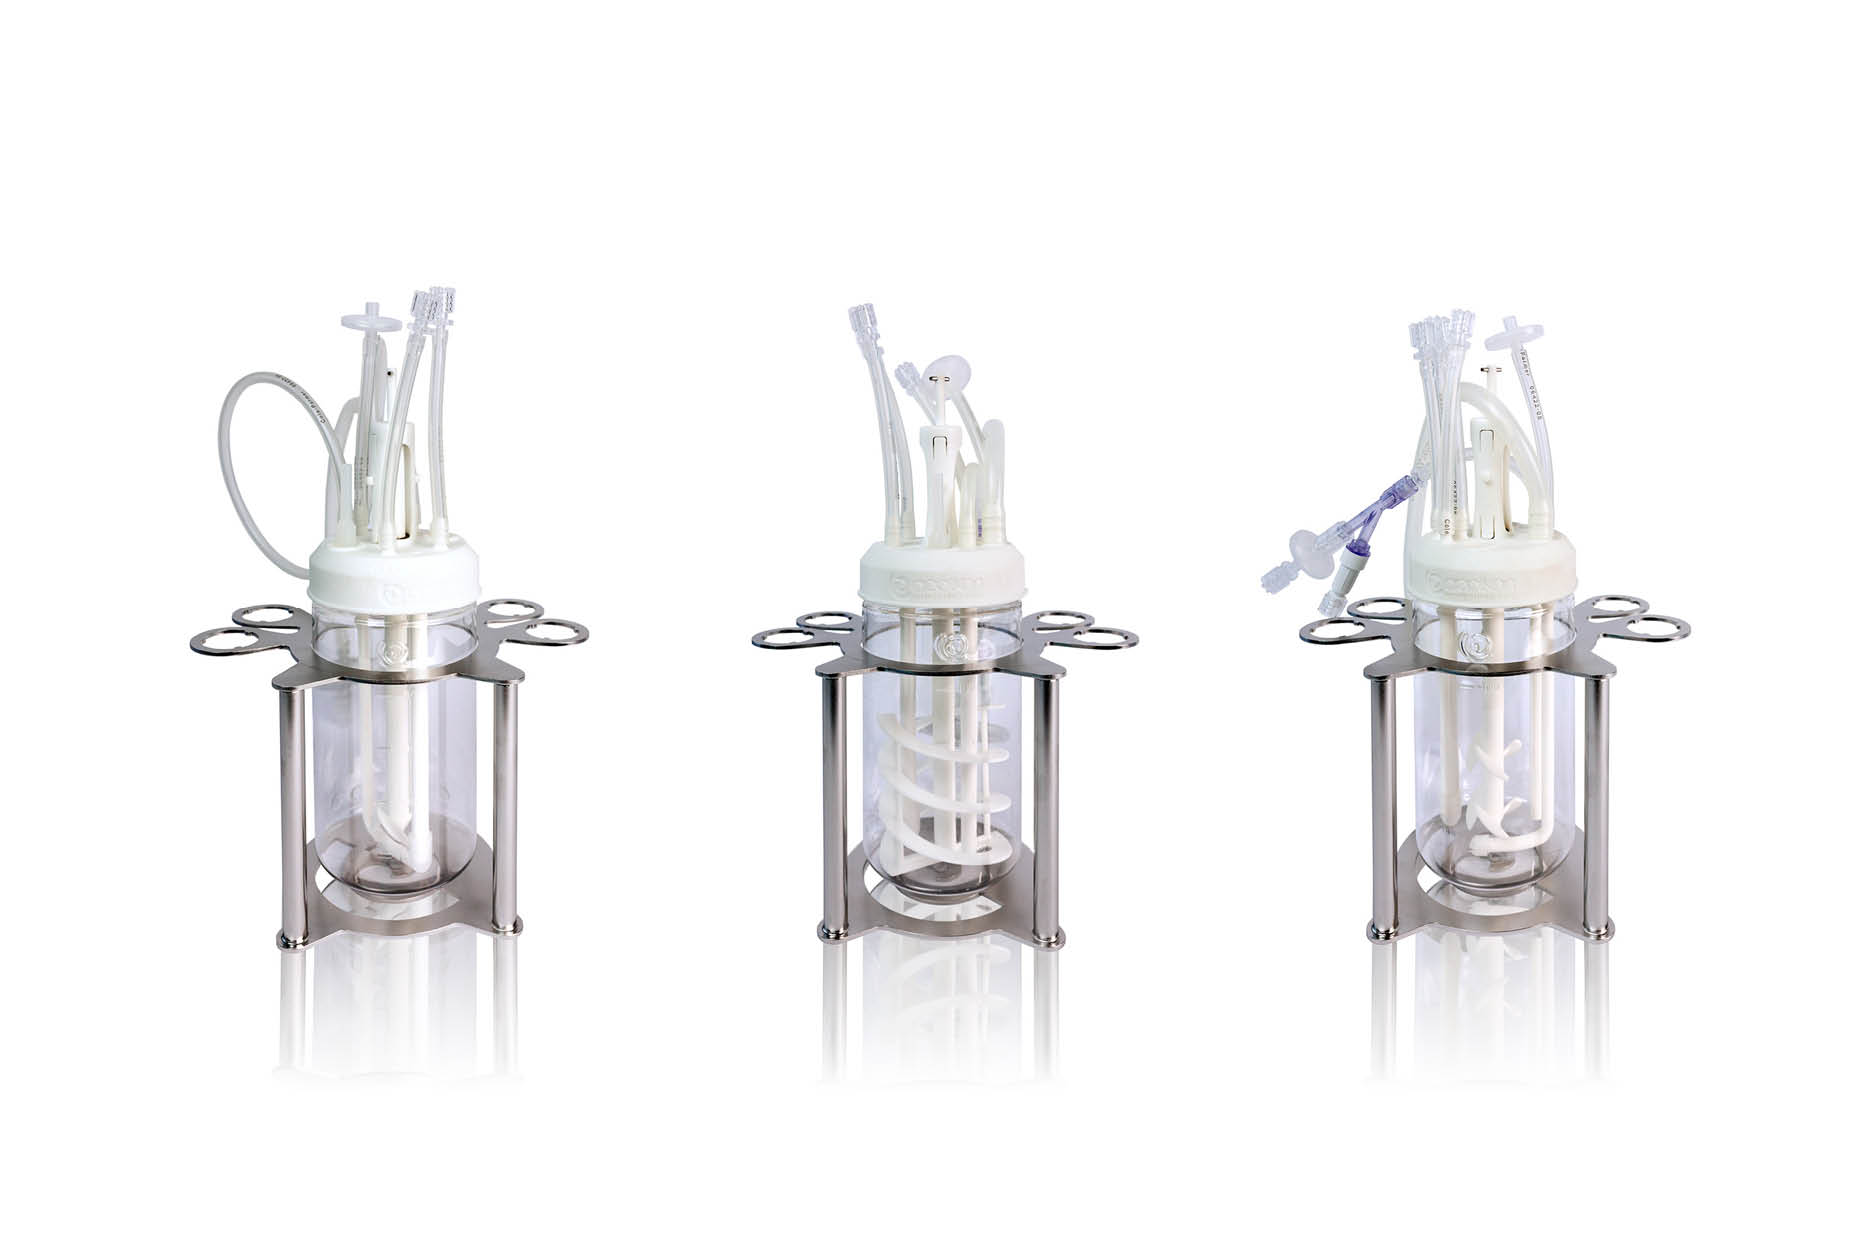 Customized single-use lab-scale bioreactors AppliFlex St with 3 different impellers and head plates